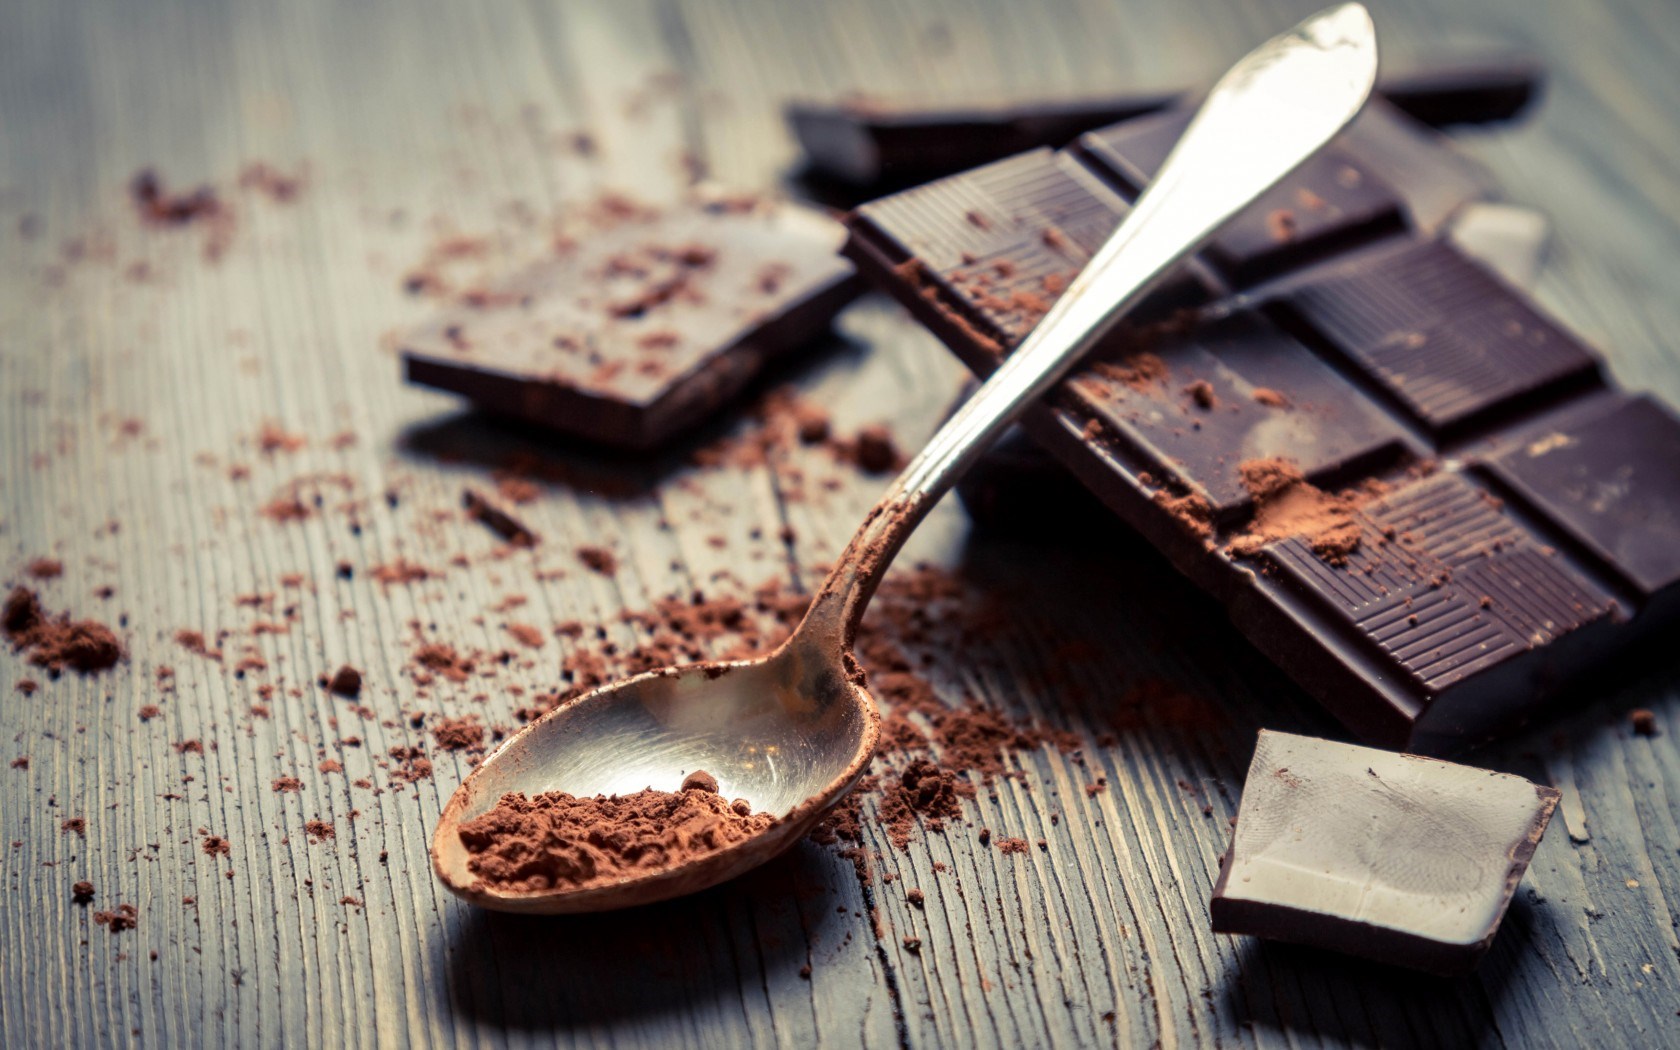 Chocolate Image HD Wallpaper And Background Photos